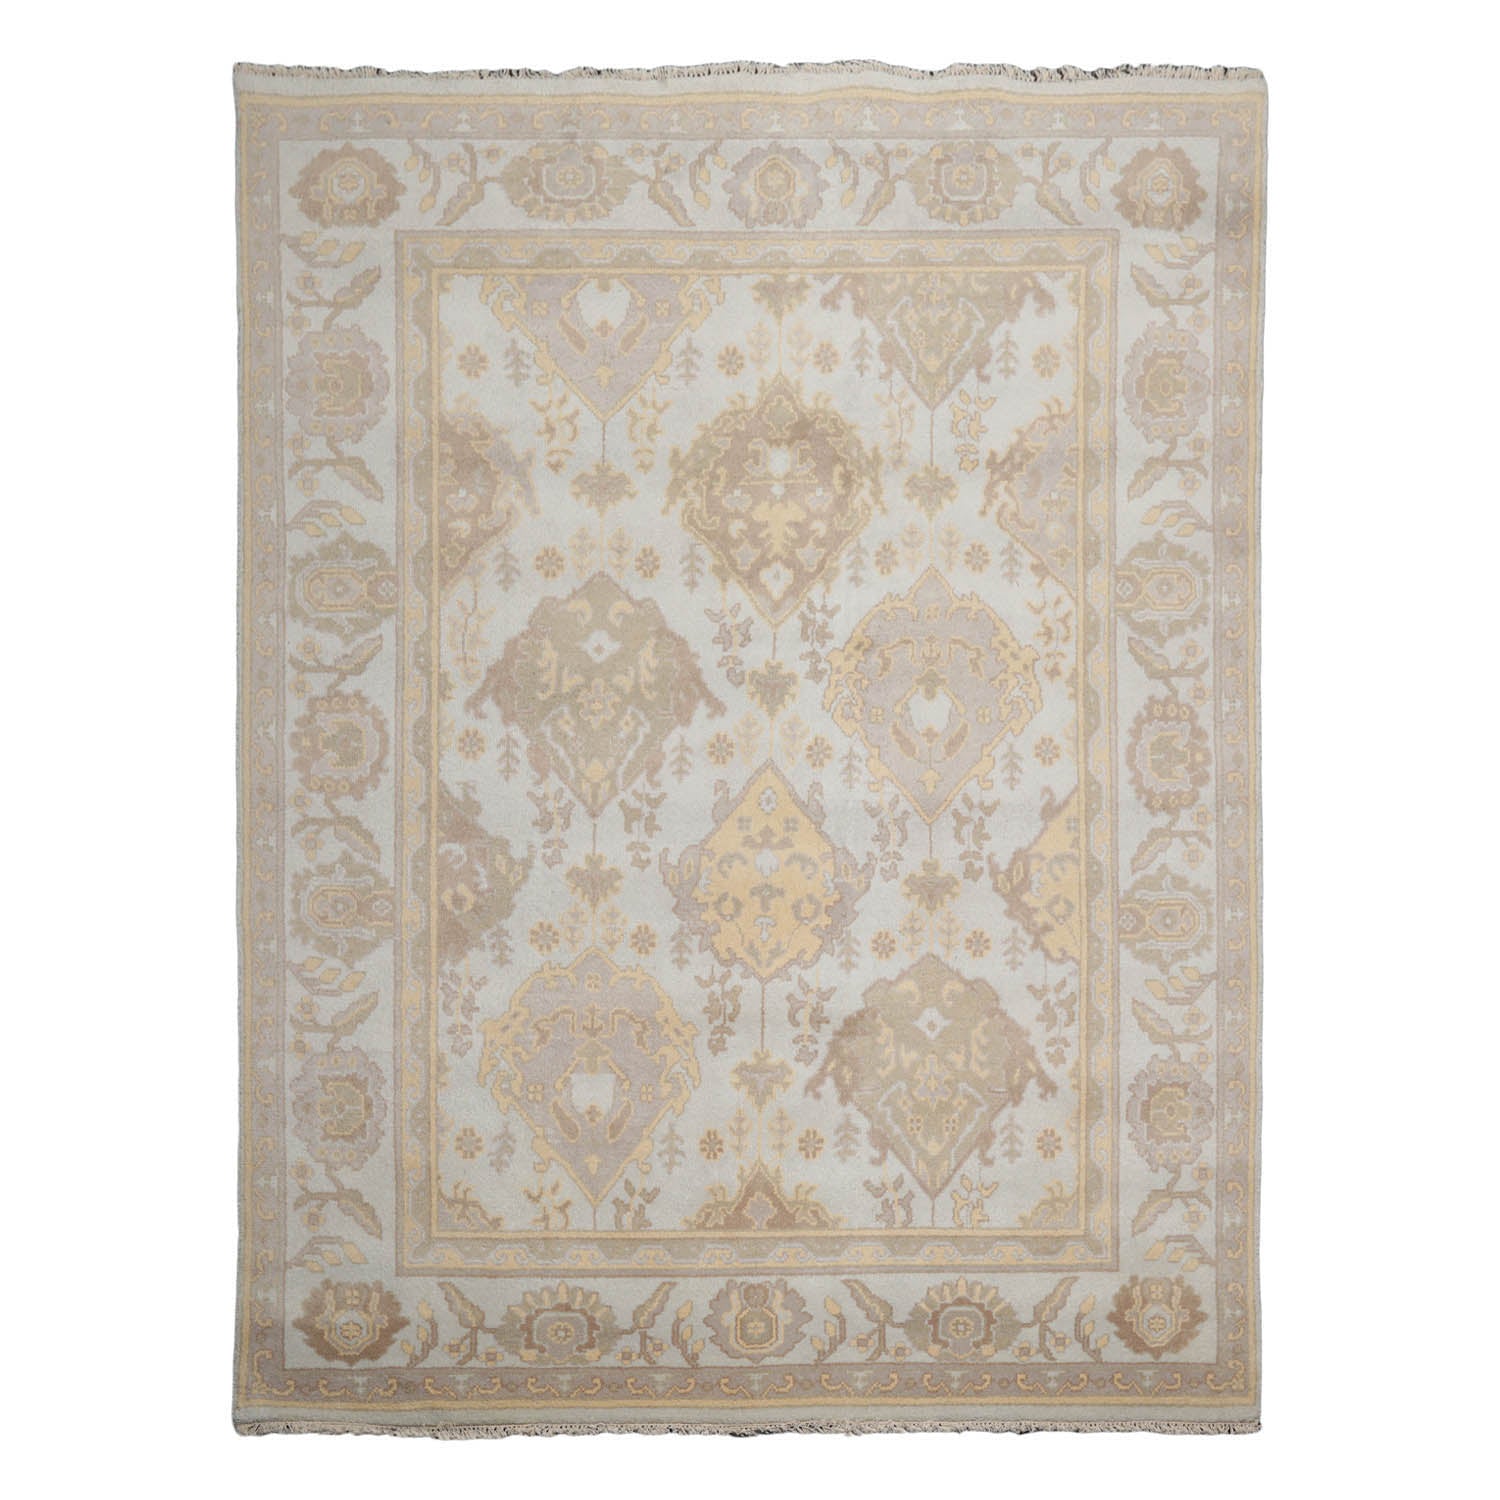 Corine 8x10 Hand Knotted 100% Wool Oushak Traditional Oriental Area Rug Gray, Taupe Color